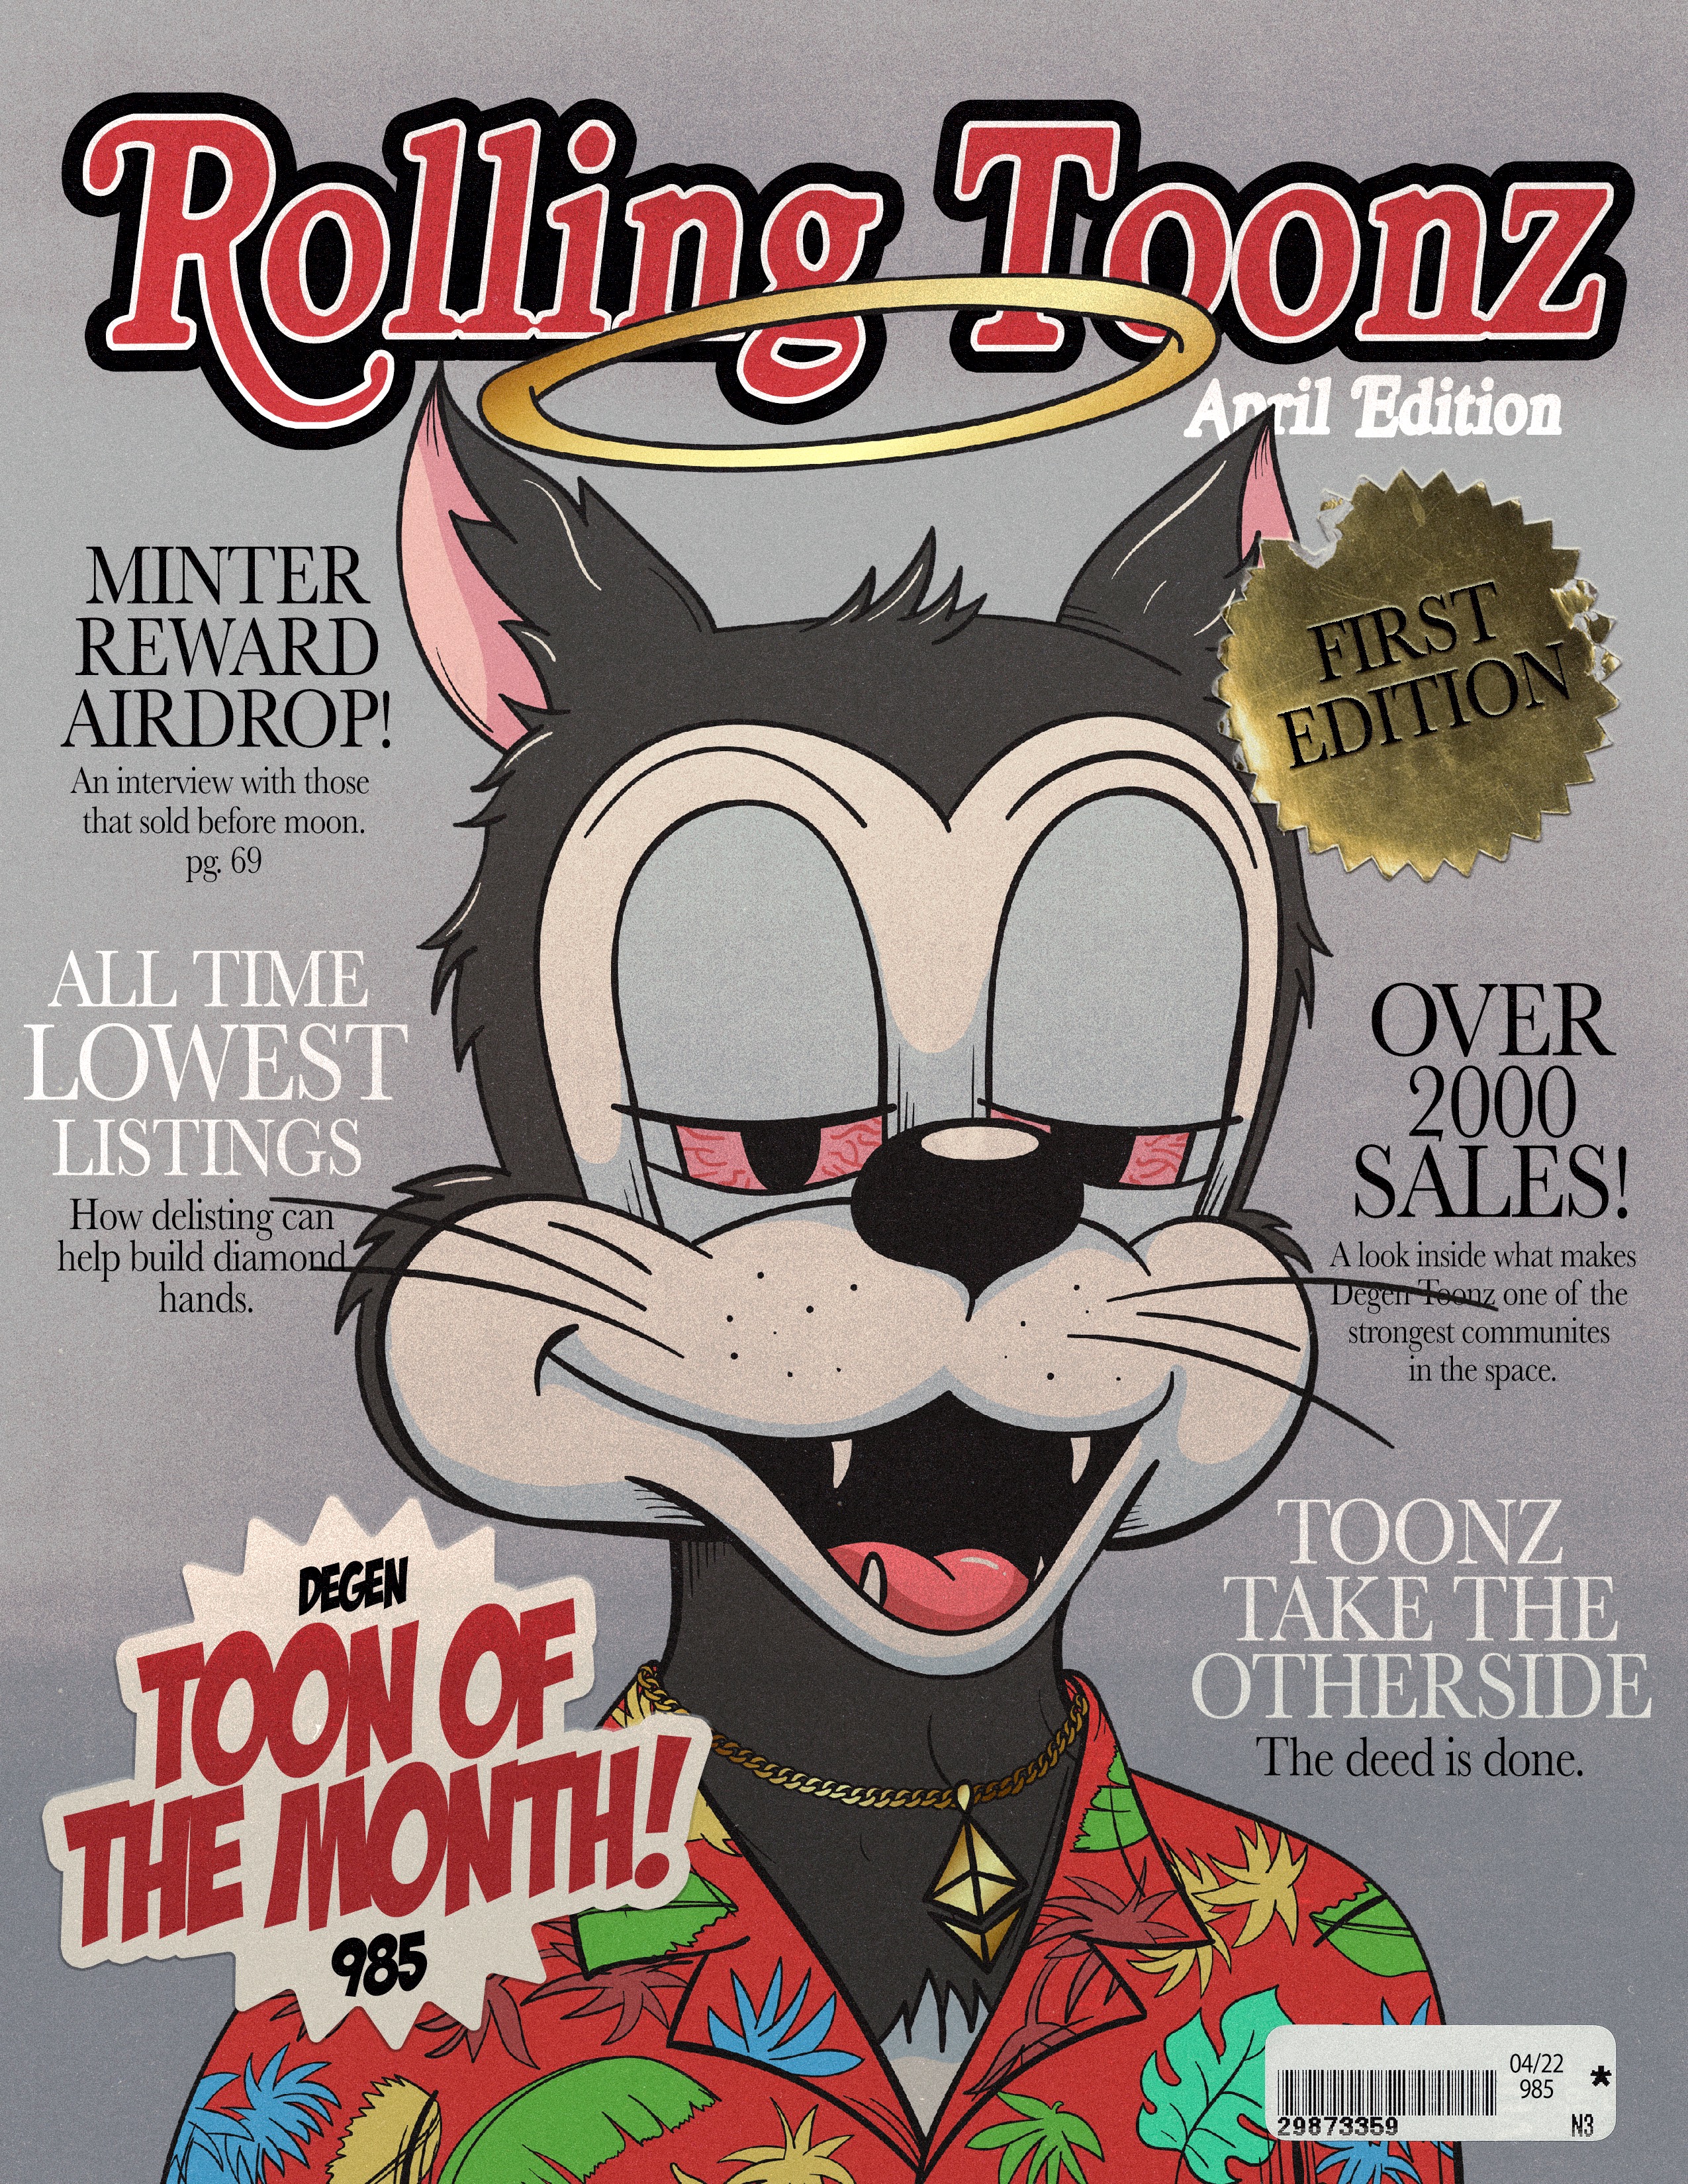 Rolling Toonz - April Edition 